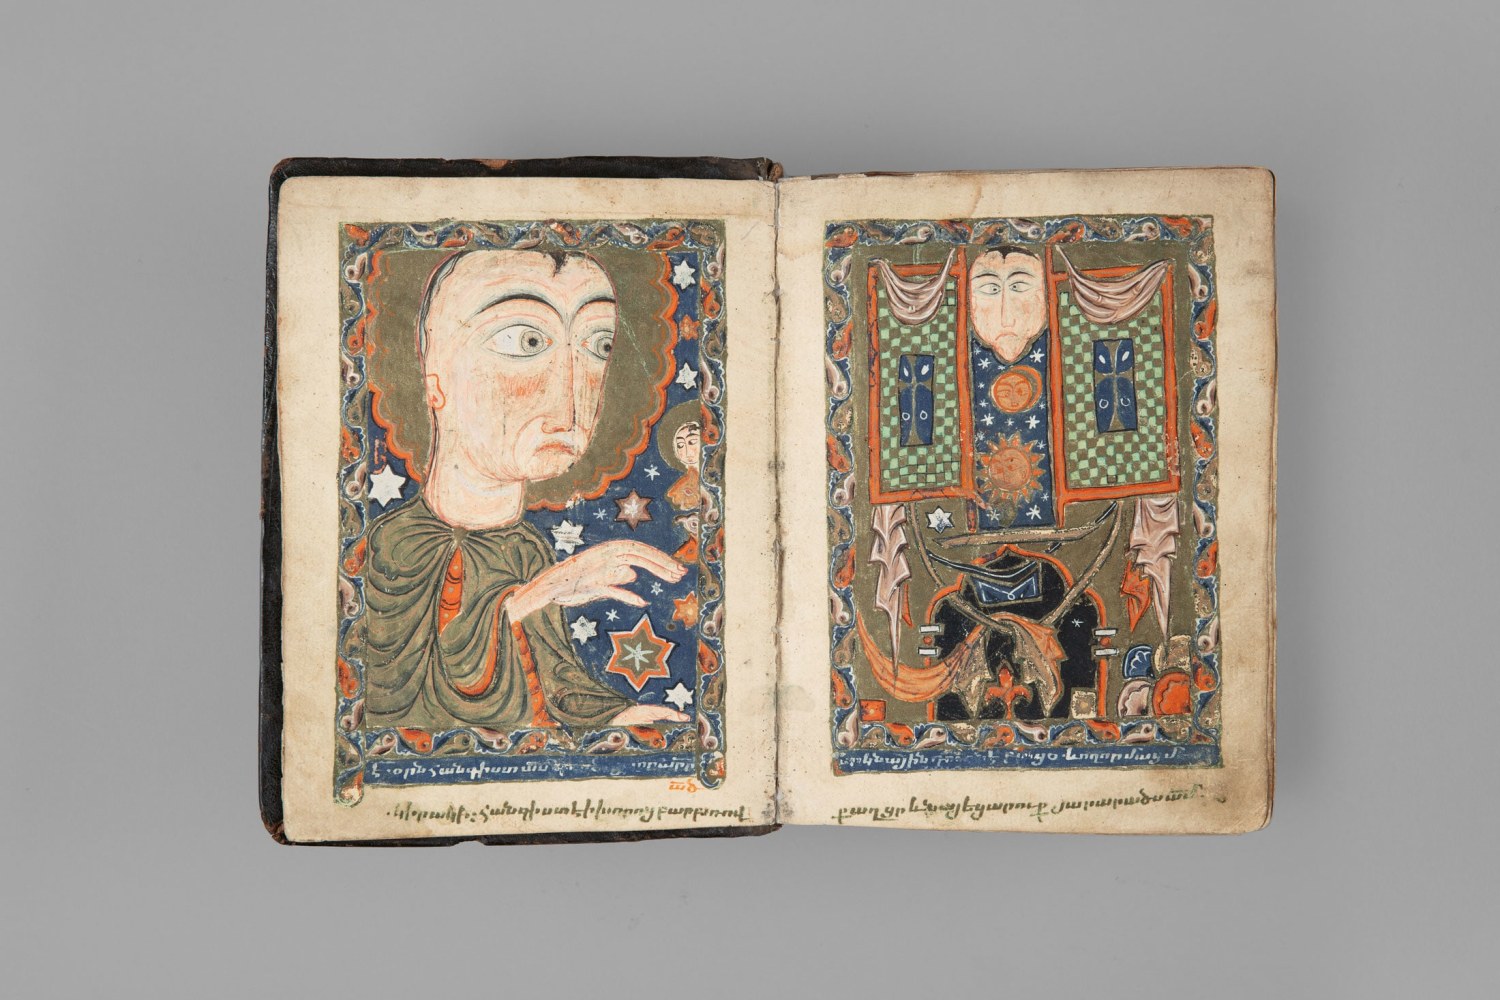 Hakob Jughayets&amp;#39;i (c. 1550-1613)
The Pozzi Gospels, Dated 1586
Armenia, Keghi
Paper with blind-stamped brown leather binding; 403 folios with 46 full-age illuminations and numerous marginal miniatures
7 3/4 x 5 3/4 inches
(19.8 x 14.5 cm)